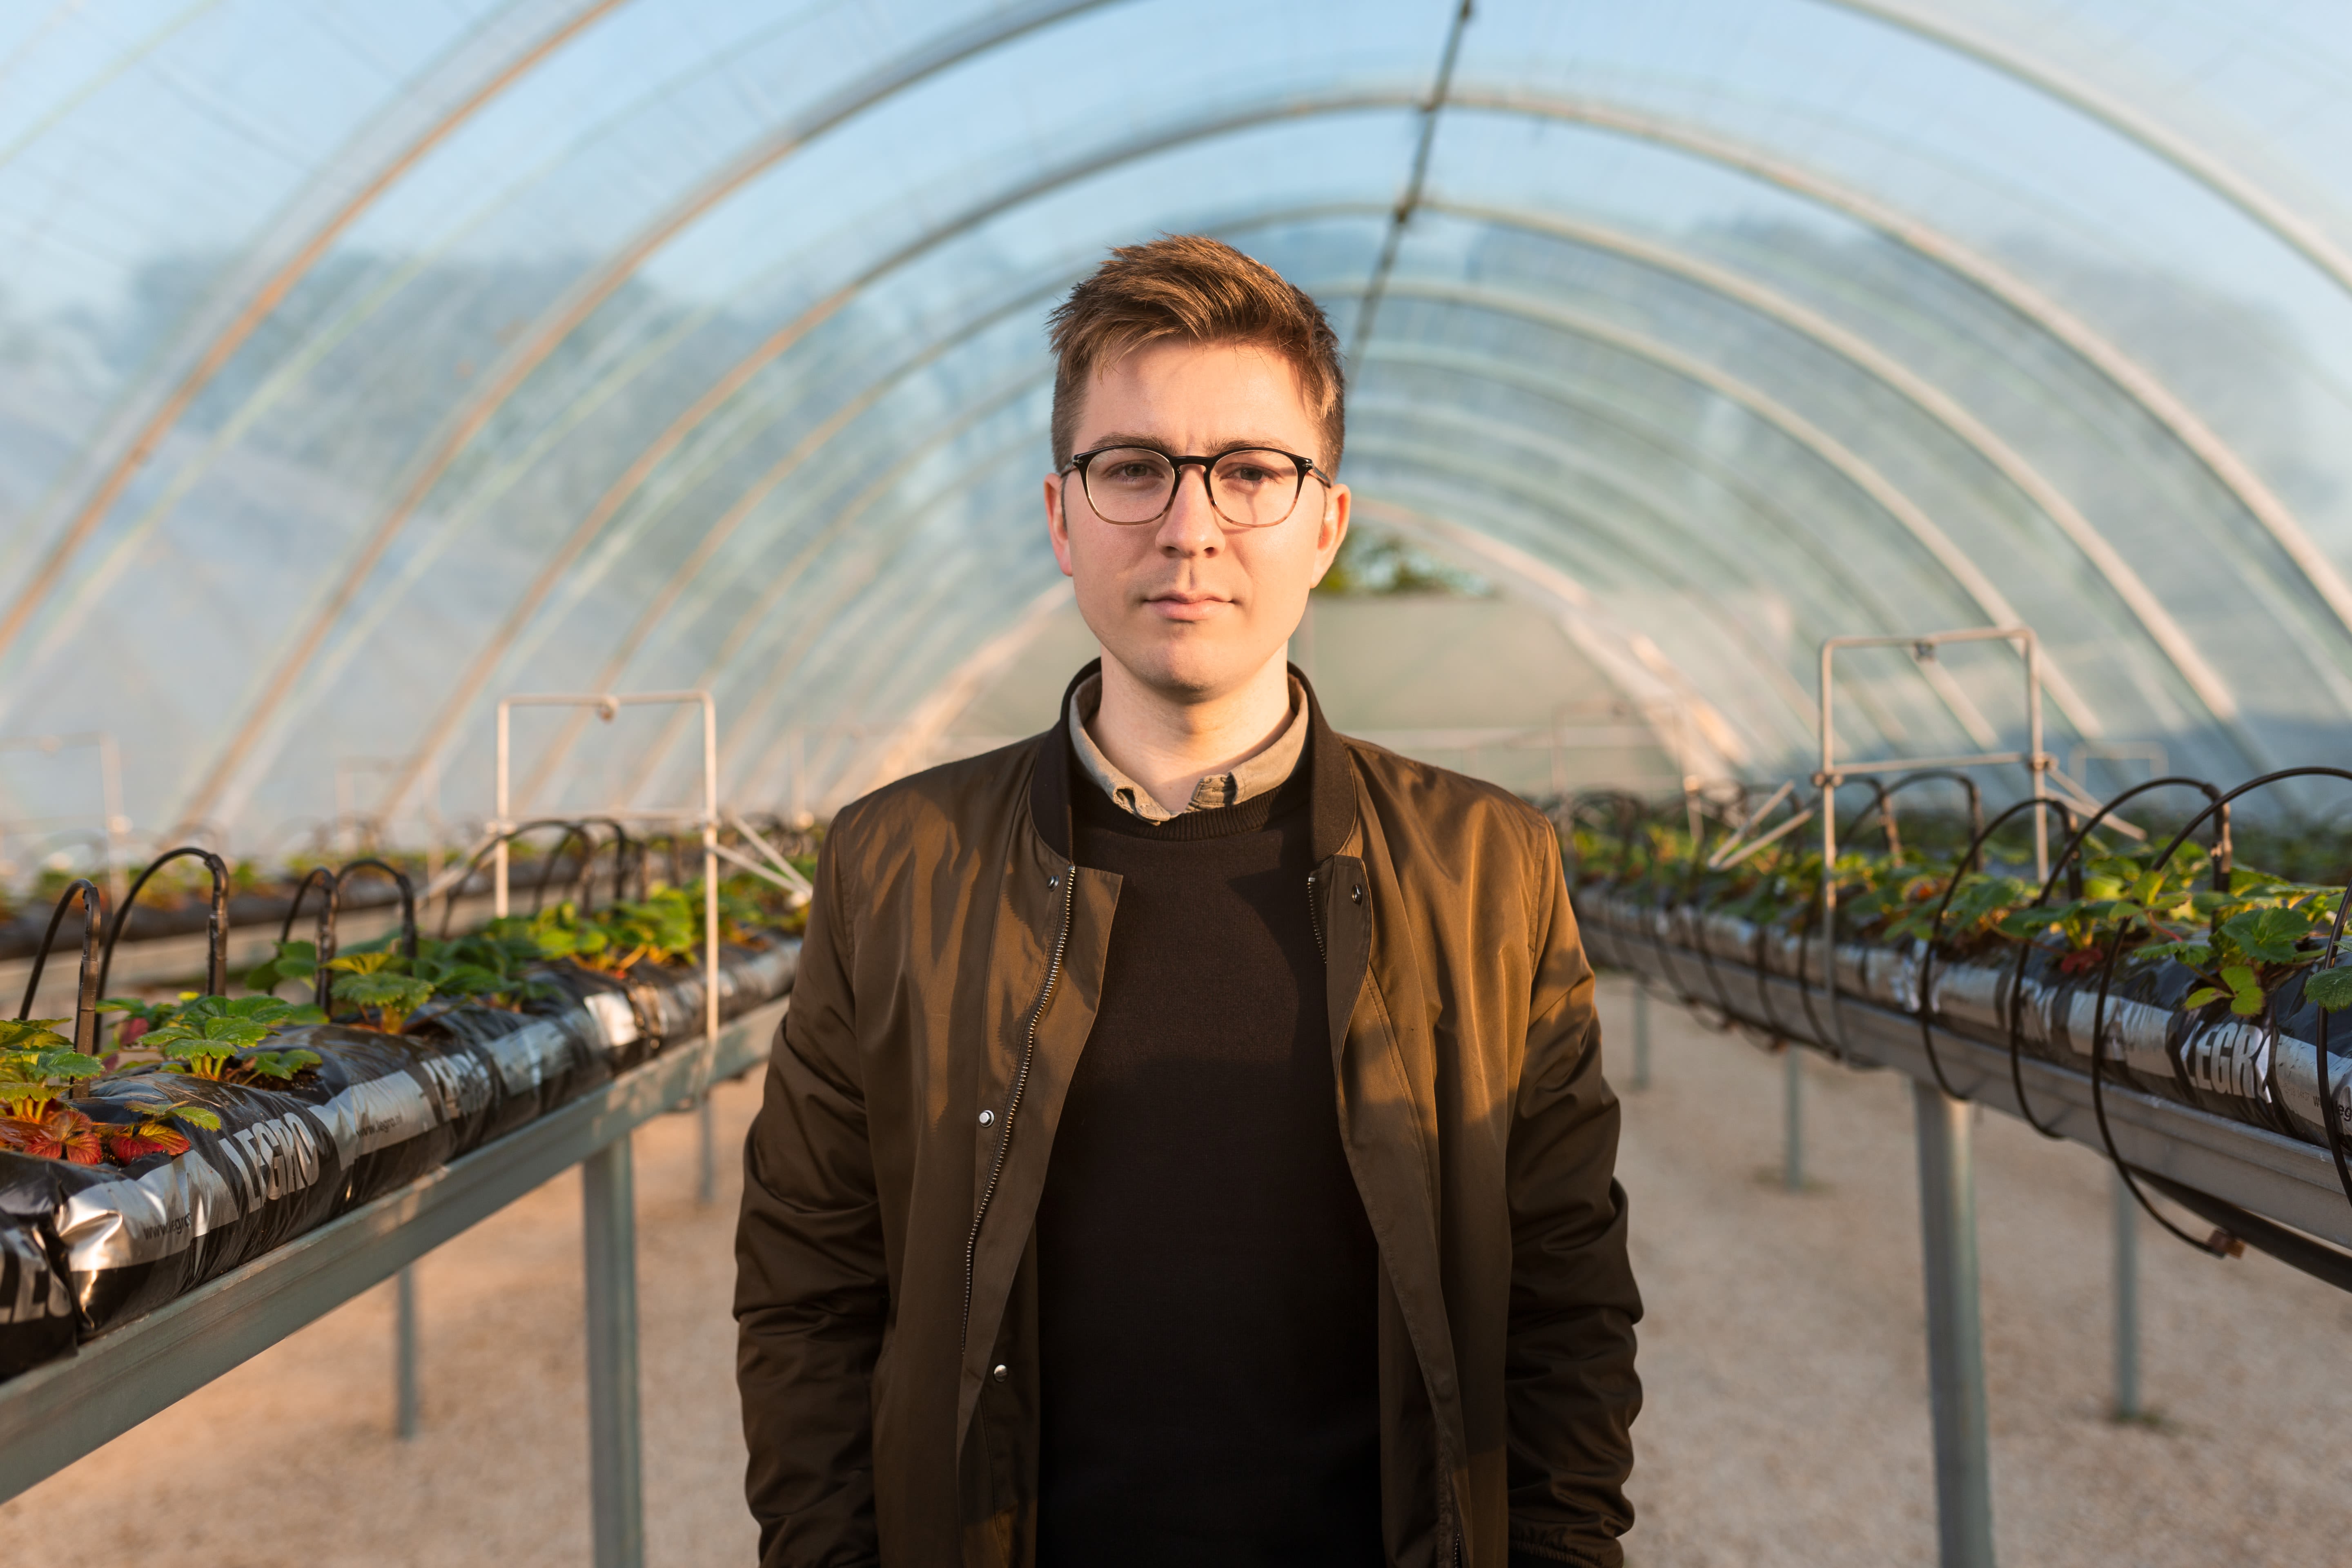 Male mechanical engineer in polytunnels